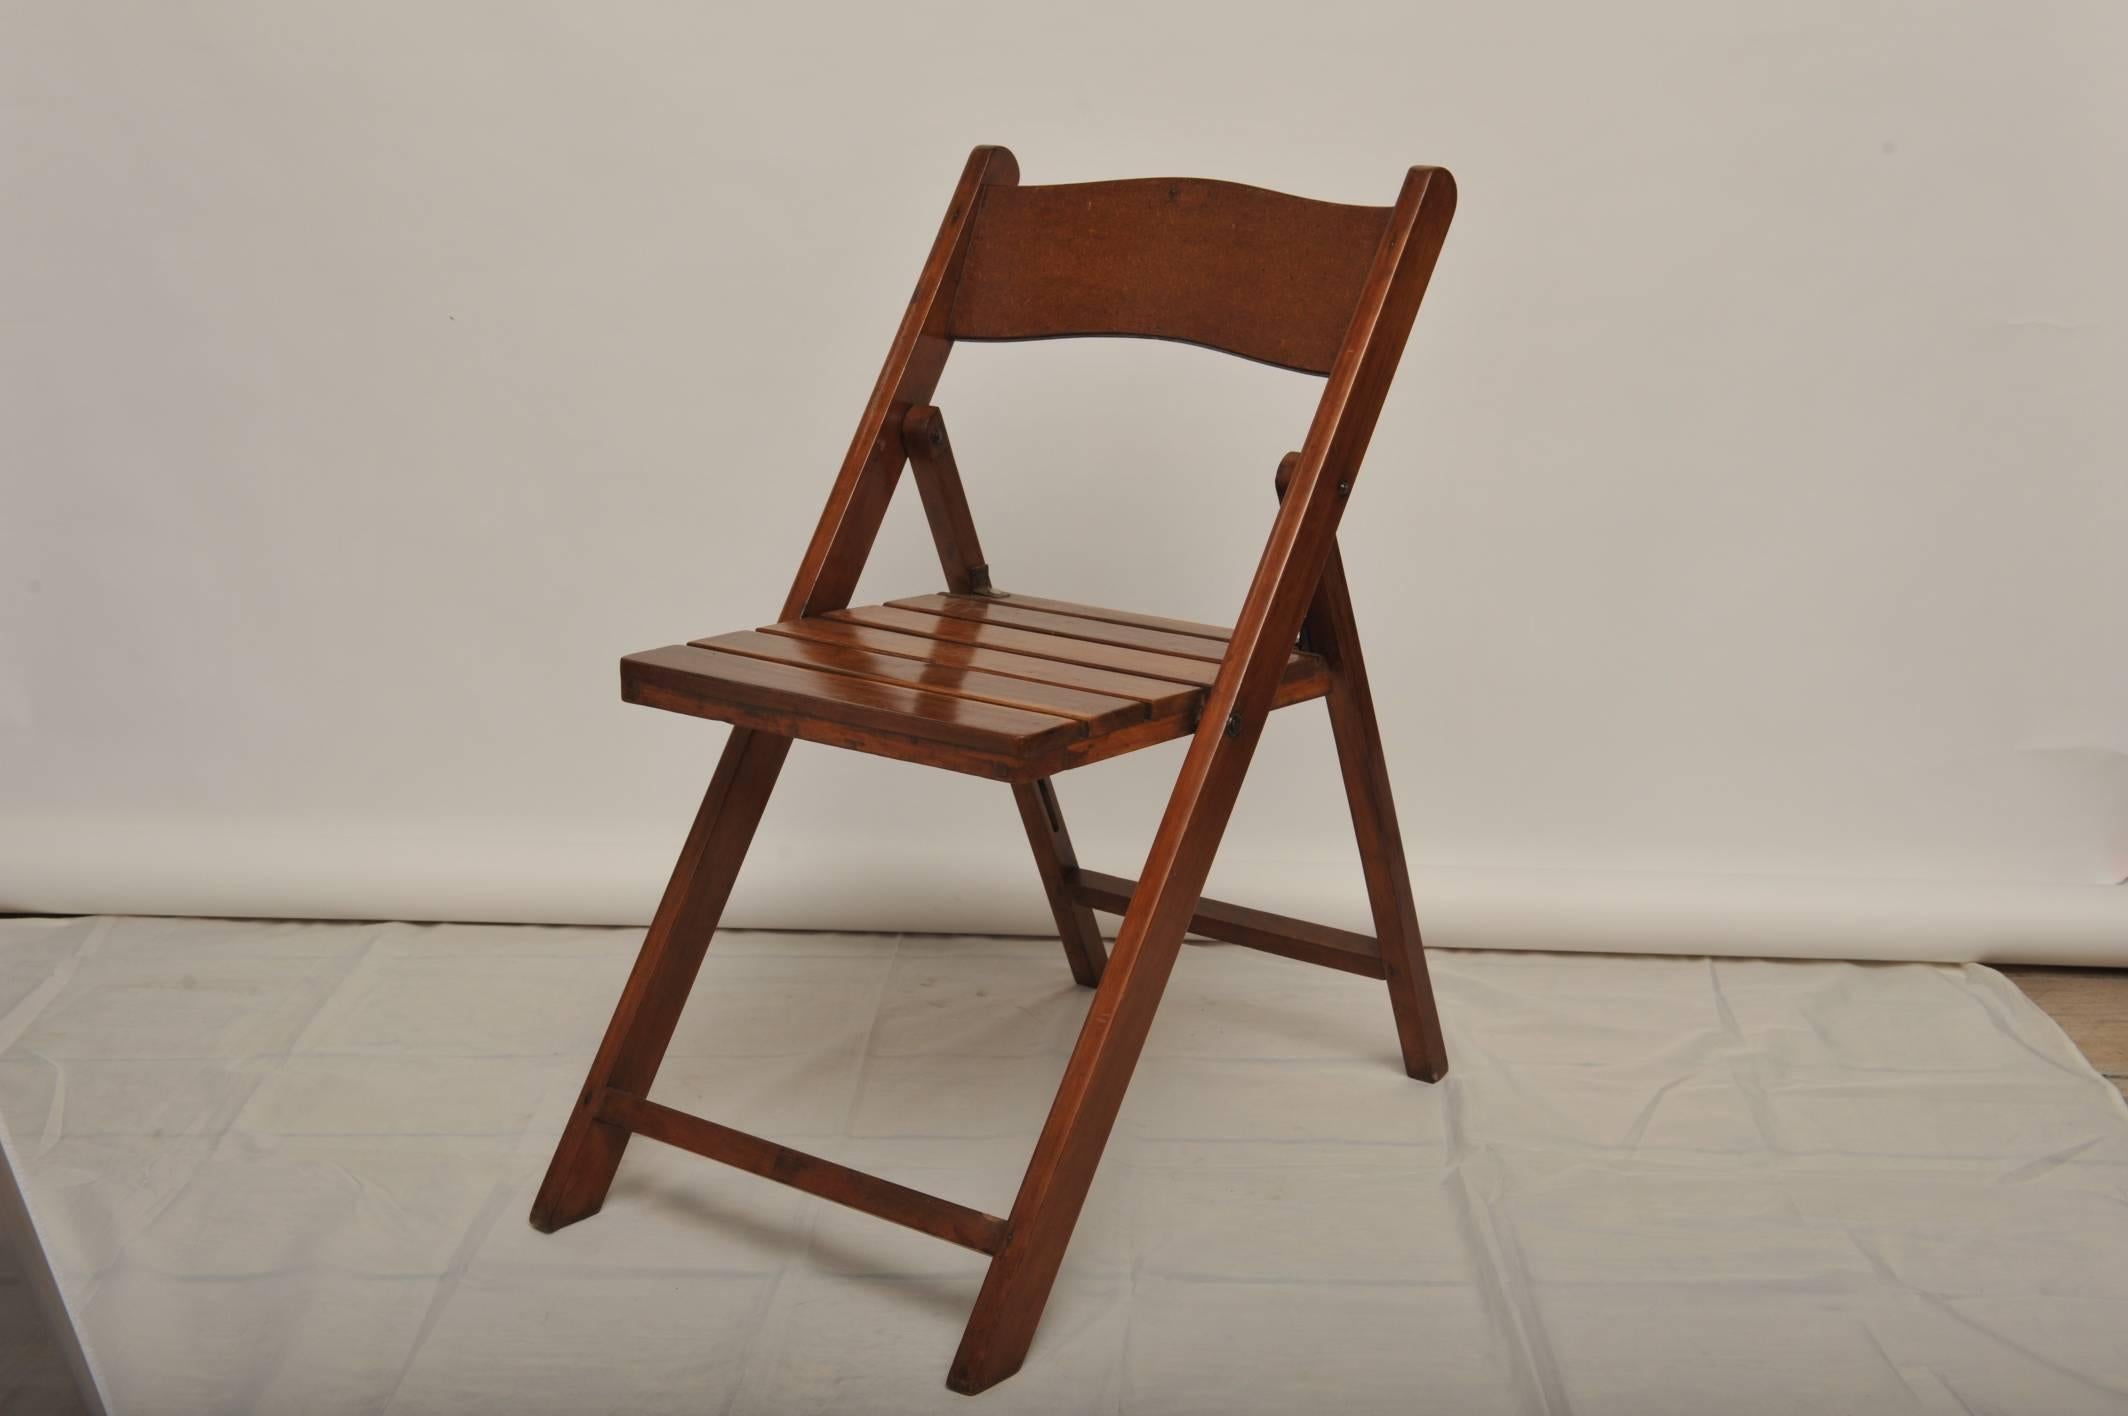 This is a set of eight folding teak chairs from a Mid-Century merchant ship's galley. They fold up quite flat when not in use making for easy storage. Included is a set of custom-made, linen, tie-back seat cushions.

Nautical artifacts on